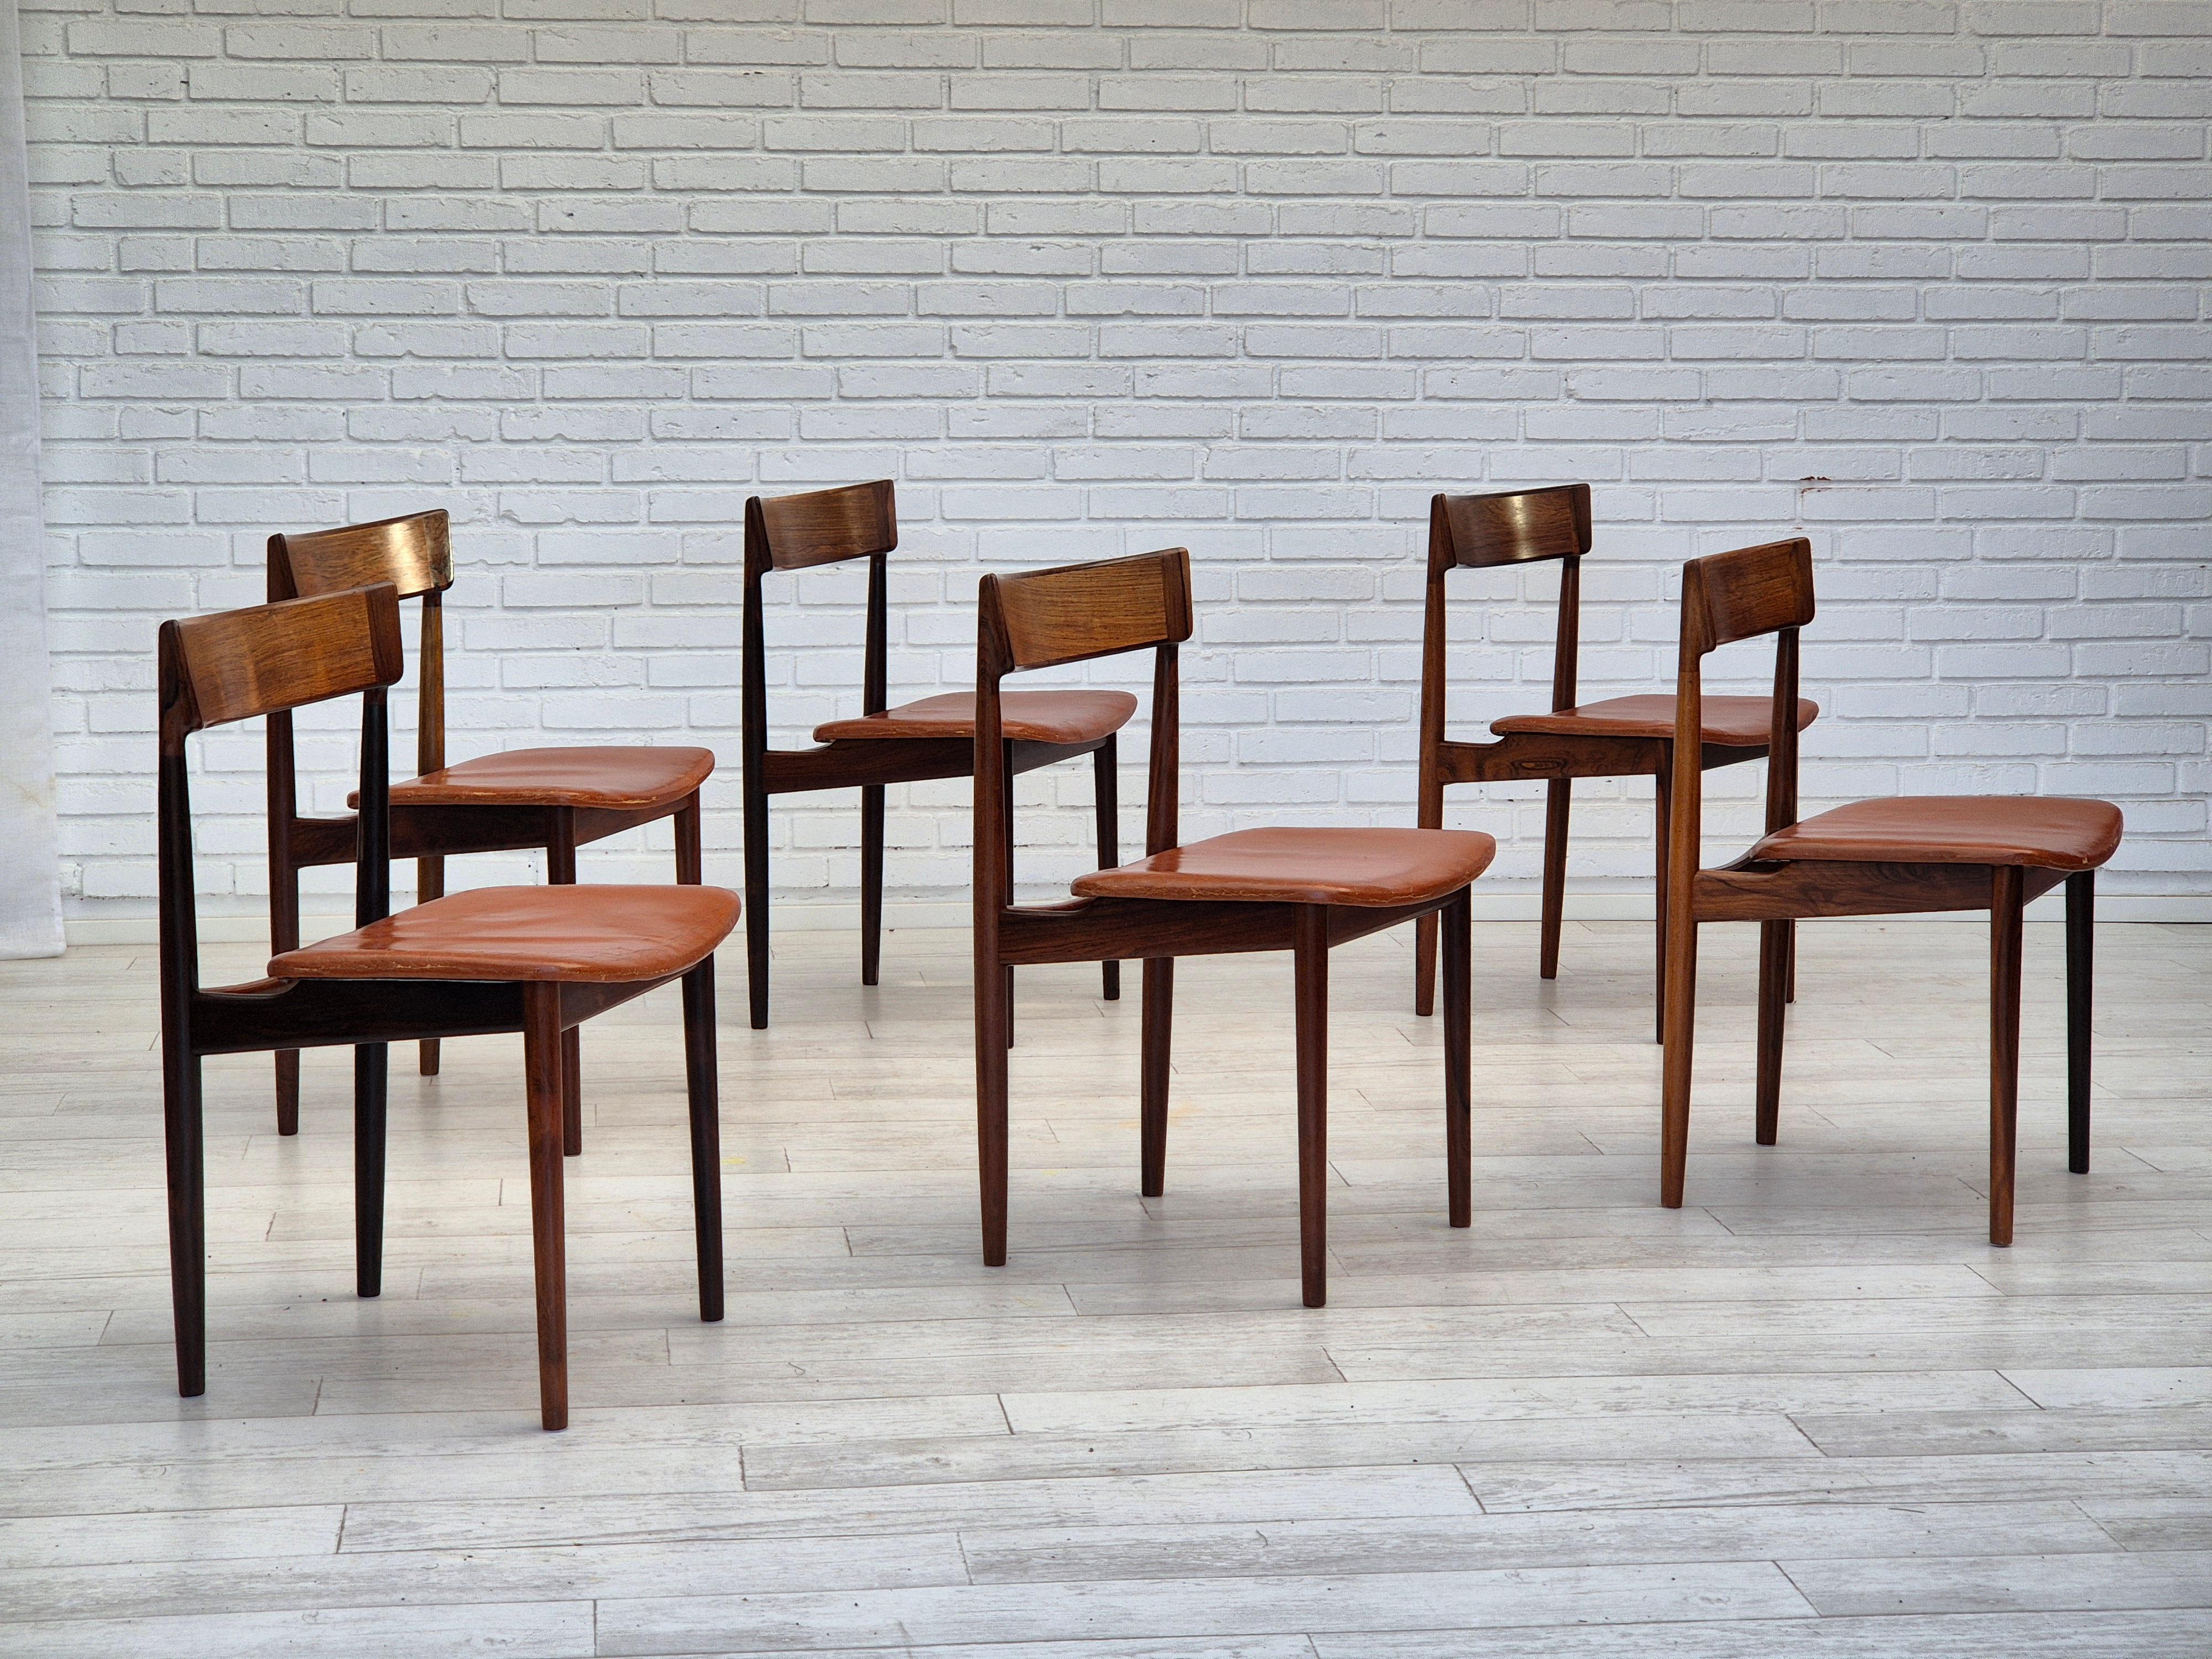 1960s, Danish design by Henry Rosengren Hansen for Brande Møbelindustri. Set of 6 rosewood dinning chairs in original very good condition. Original light brun patinated leather. Manufactured by Danish furniture manufacturer in about 1960s.